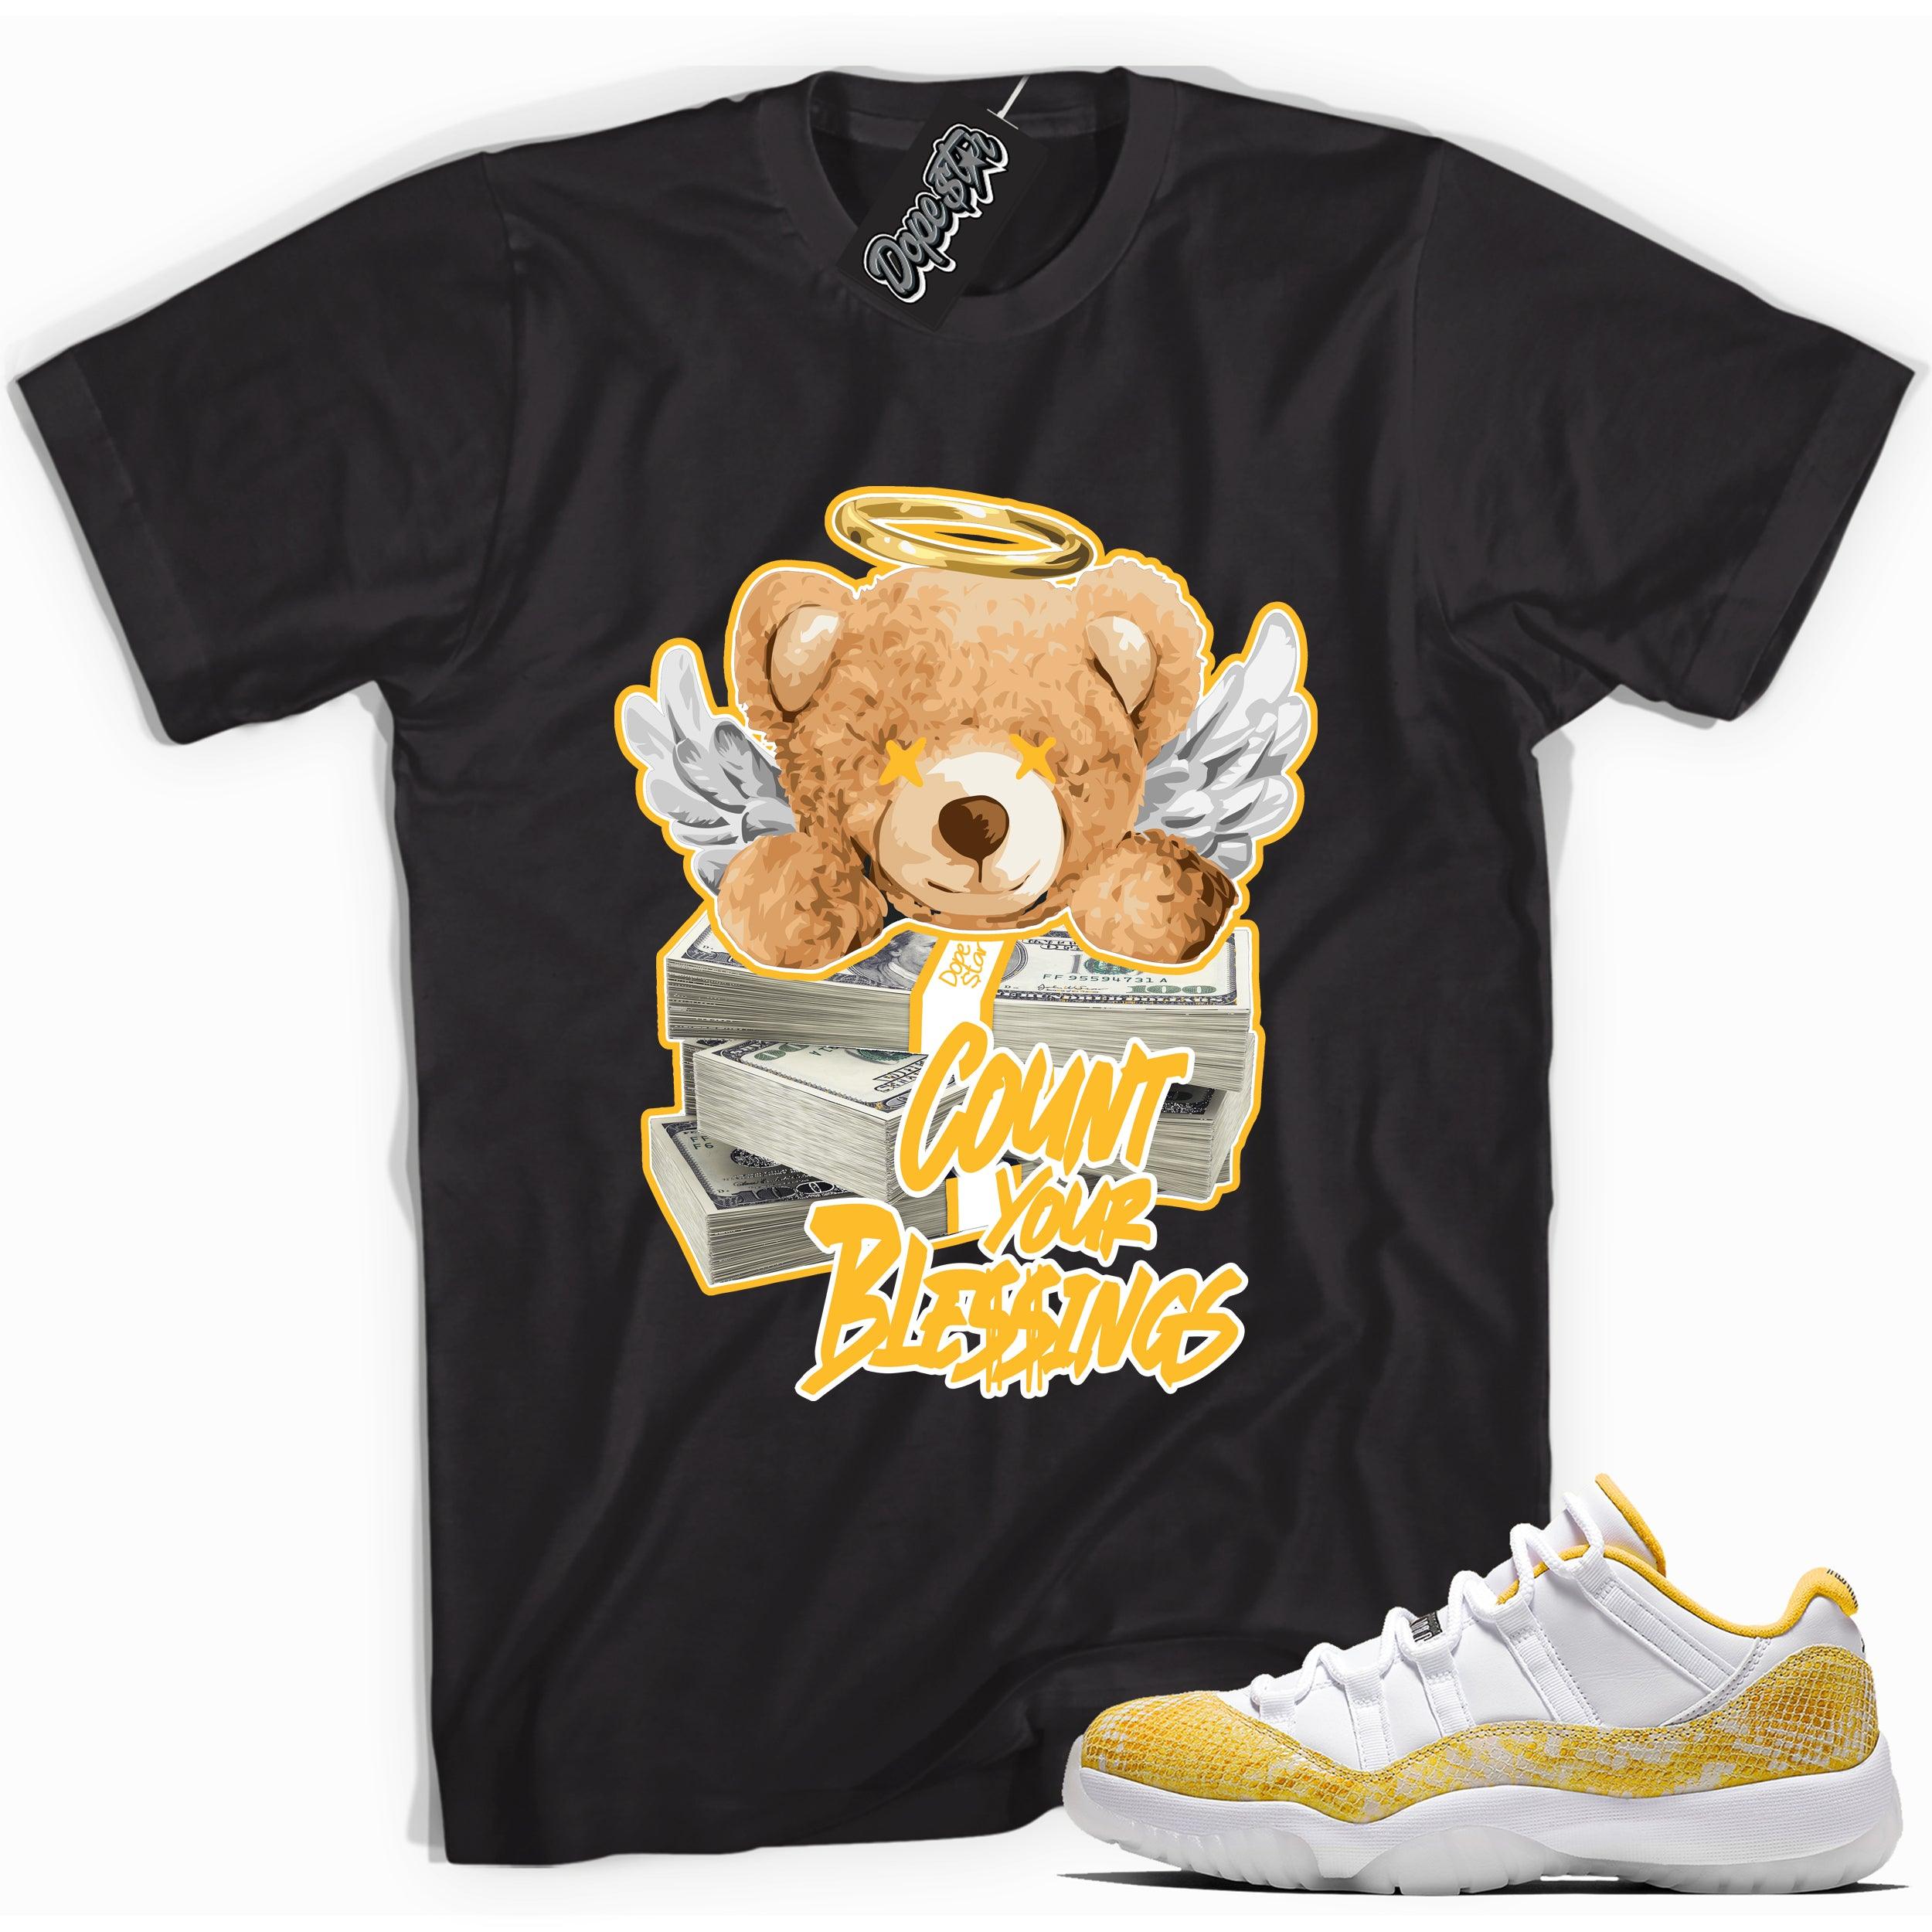 Cool black graphic tee with 'count your blessings' print, that perfectly matches  Air Jordan 11 Low Yellow Snakeskin sneakers